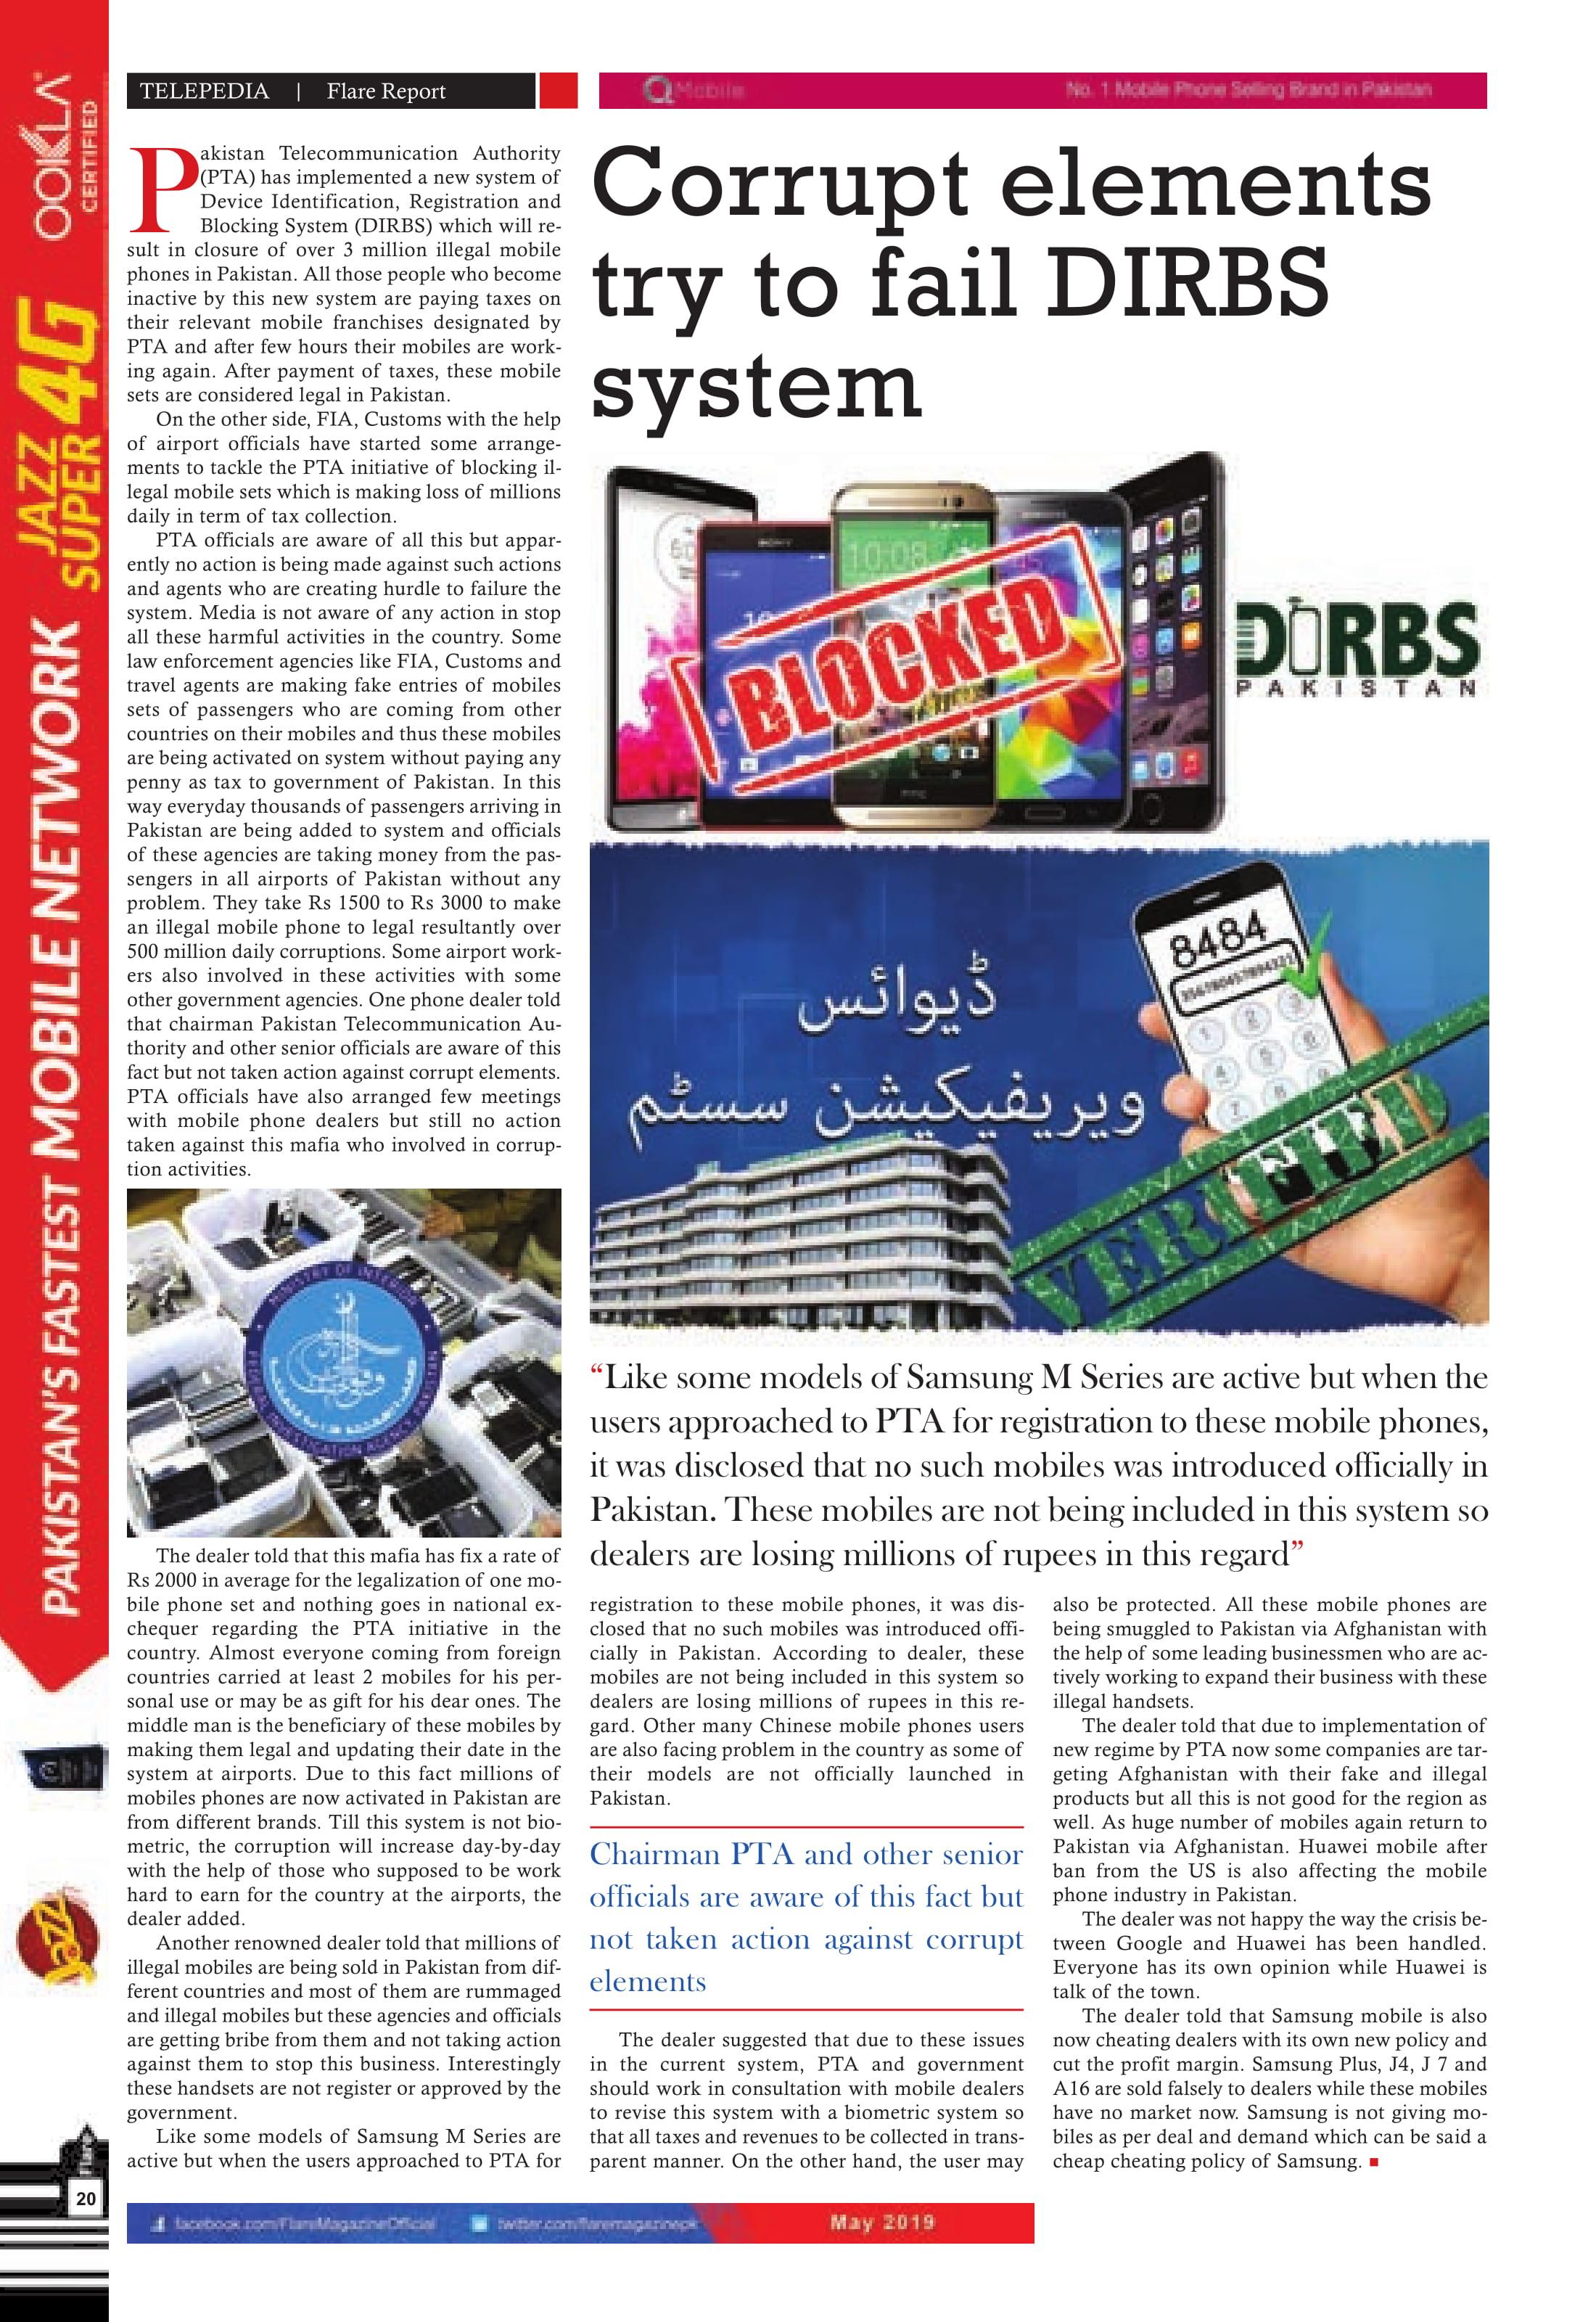 Corrupt elements try to fail DIRBS system